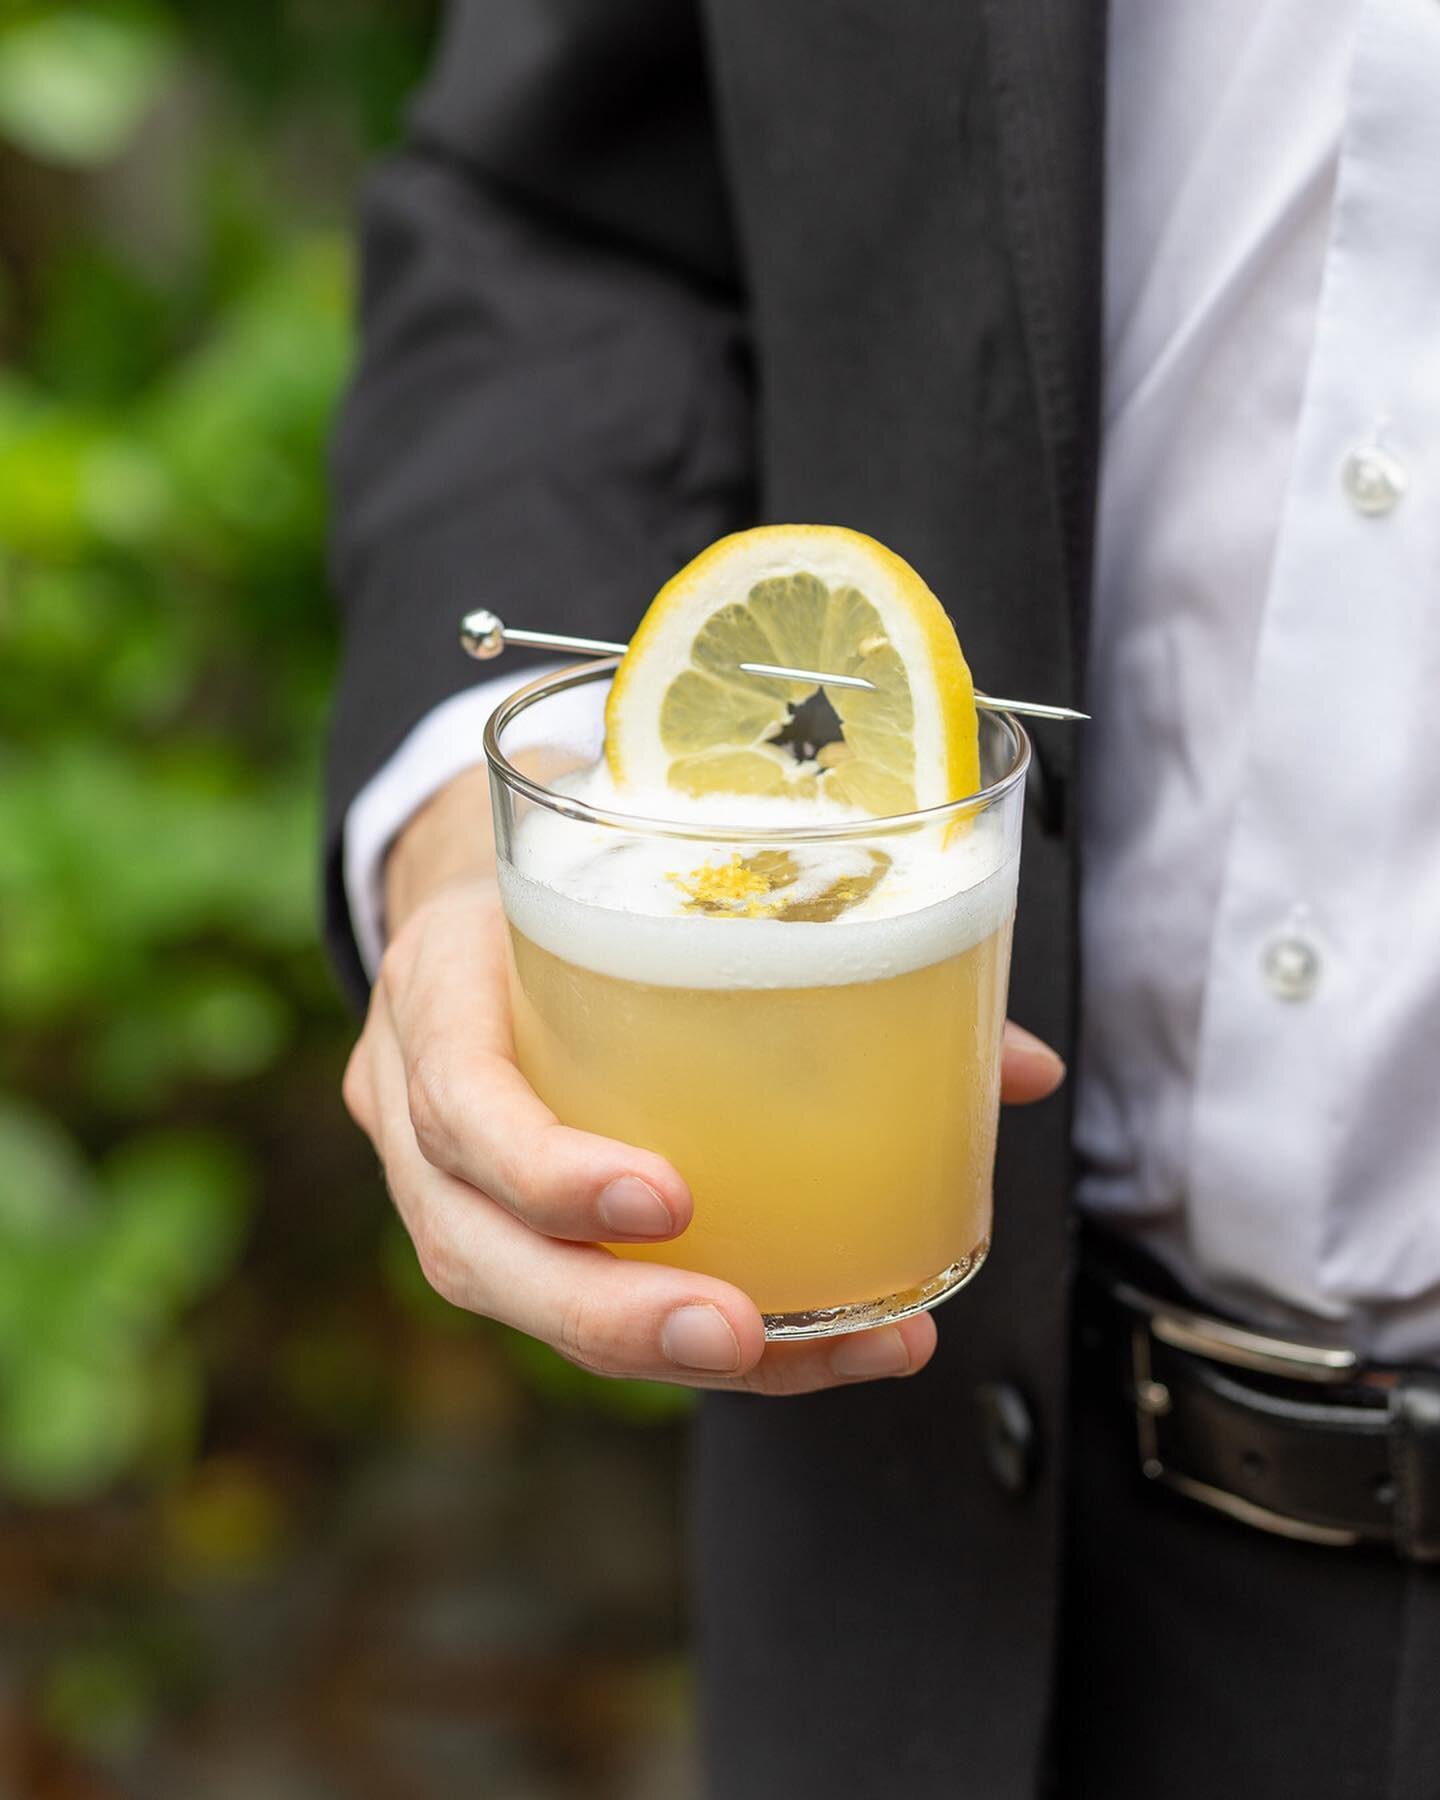 The perfect drink helps to make those perfect moments. Good Start is the cocktail ready to launch your afternoon for whatever is coming next.
⠀⠀⠀⠀⠀⠀⠀⠀⠀
This cocktail was inspired by Jeffrey Morgenthaler&rsquo;s Amaretto Sour. It takes a lighter appro